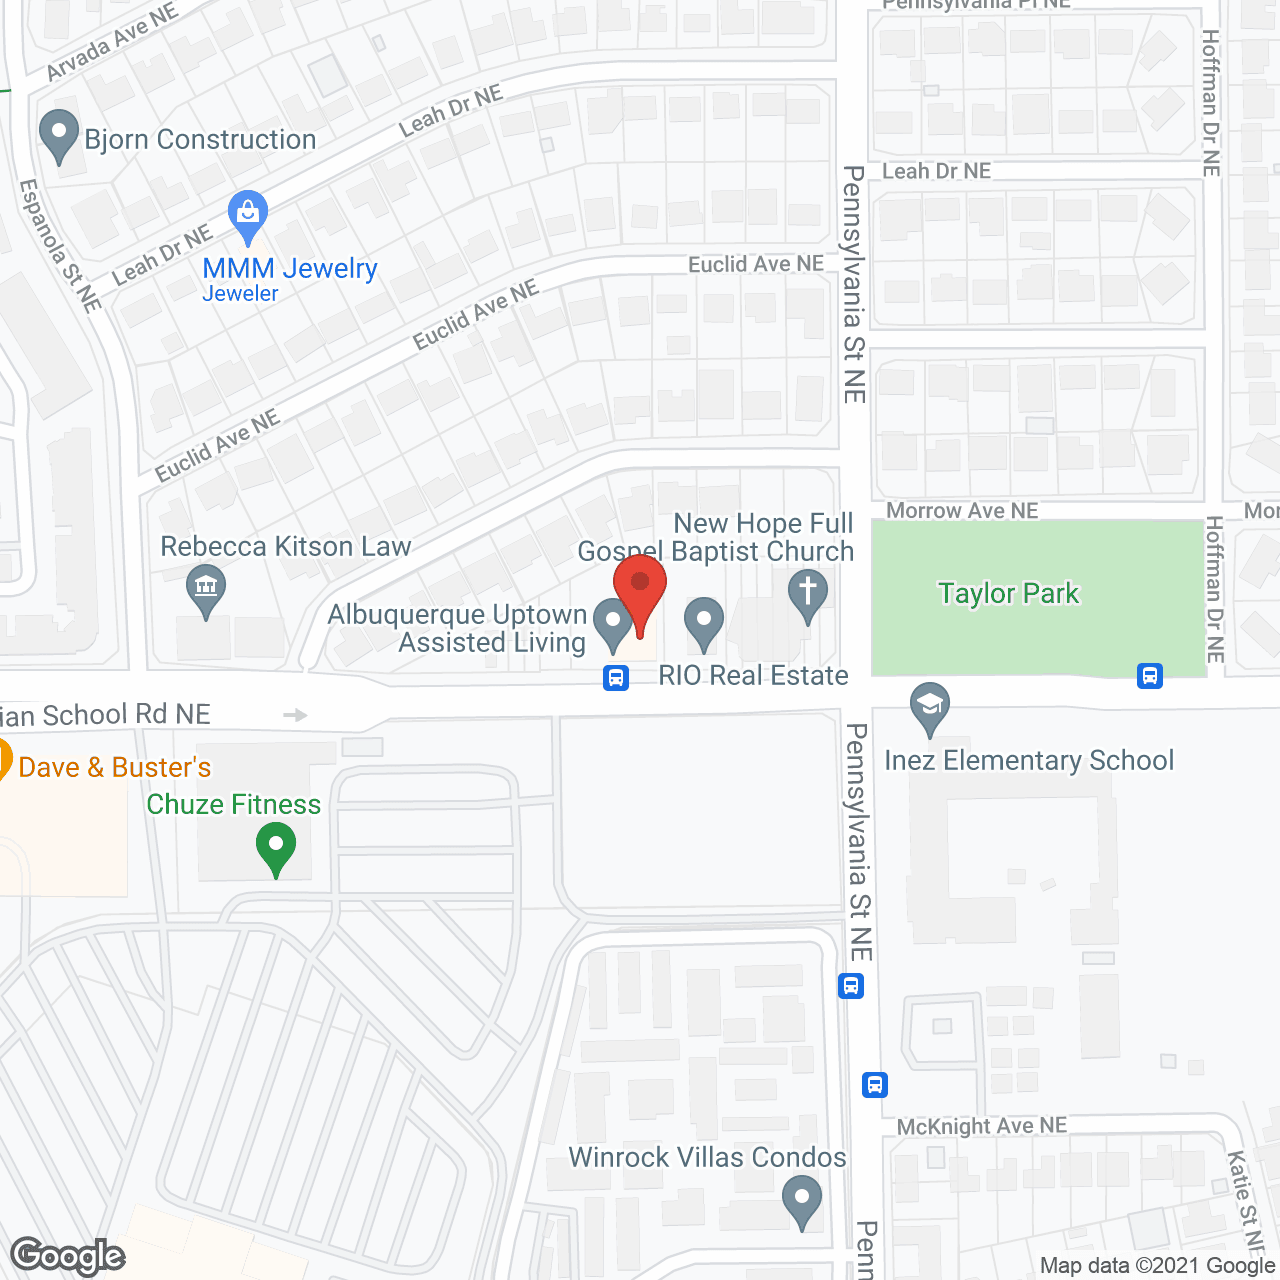 Albuquerque Uptown Assisted Living in google map